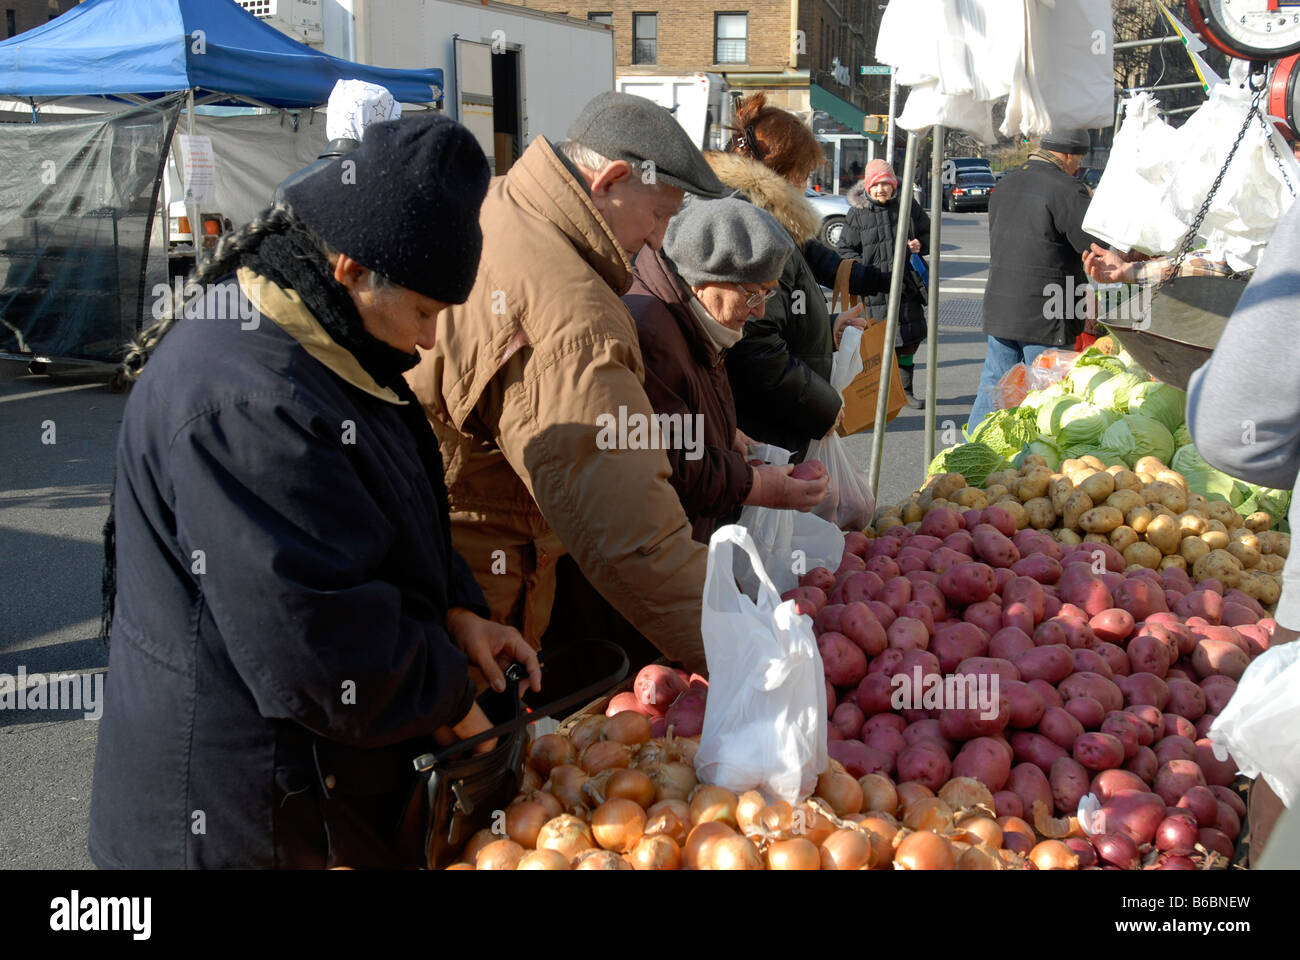 Shoppers buy produce at a Greenmarket in the Washington Heights neighborhood of New York Stock Photo